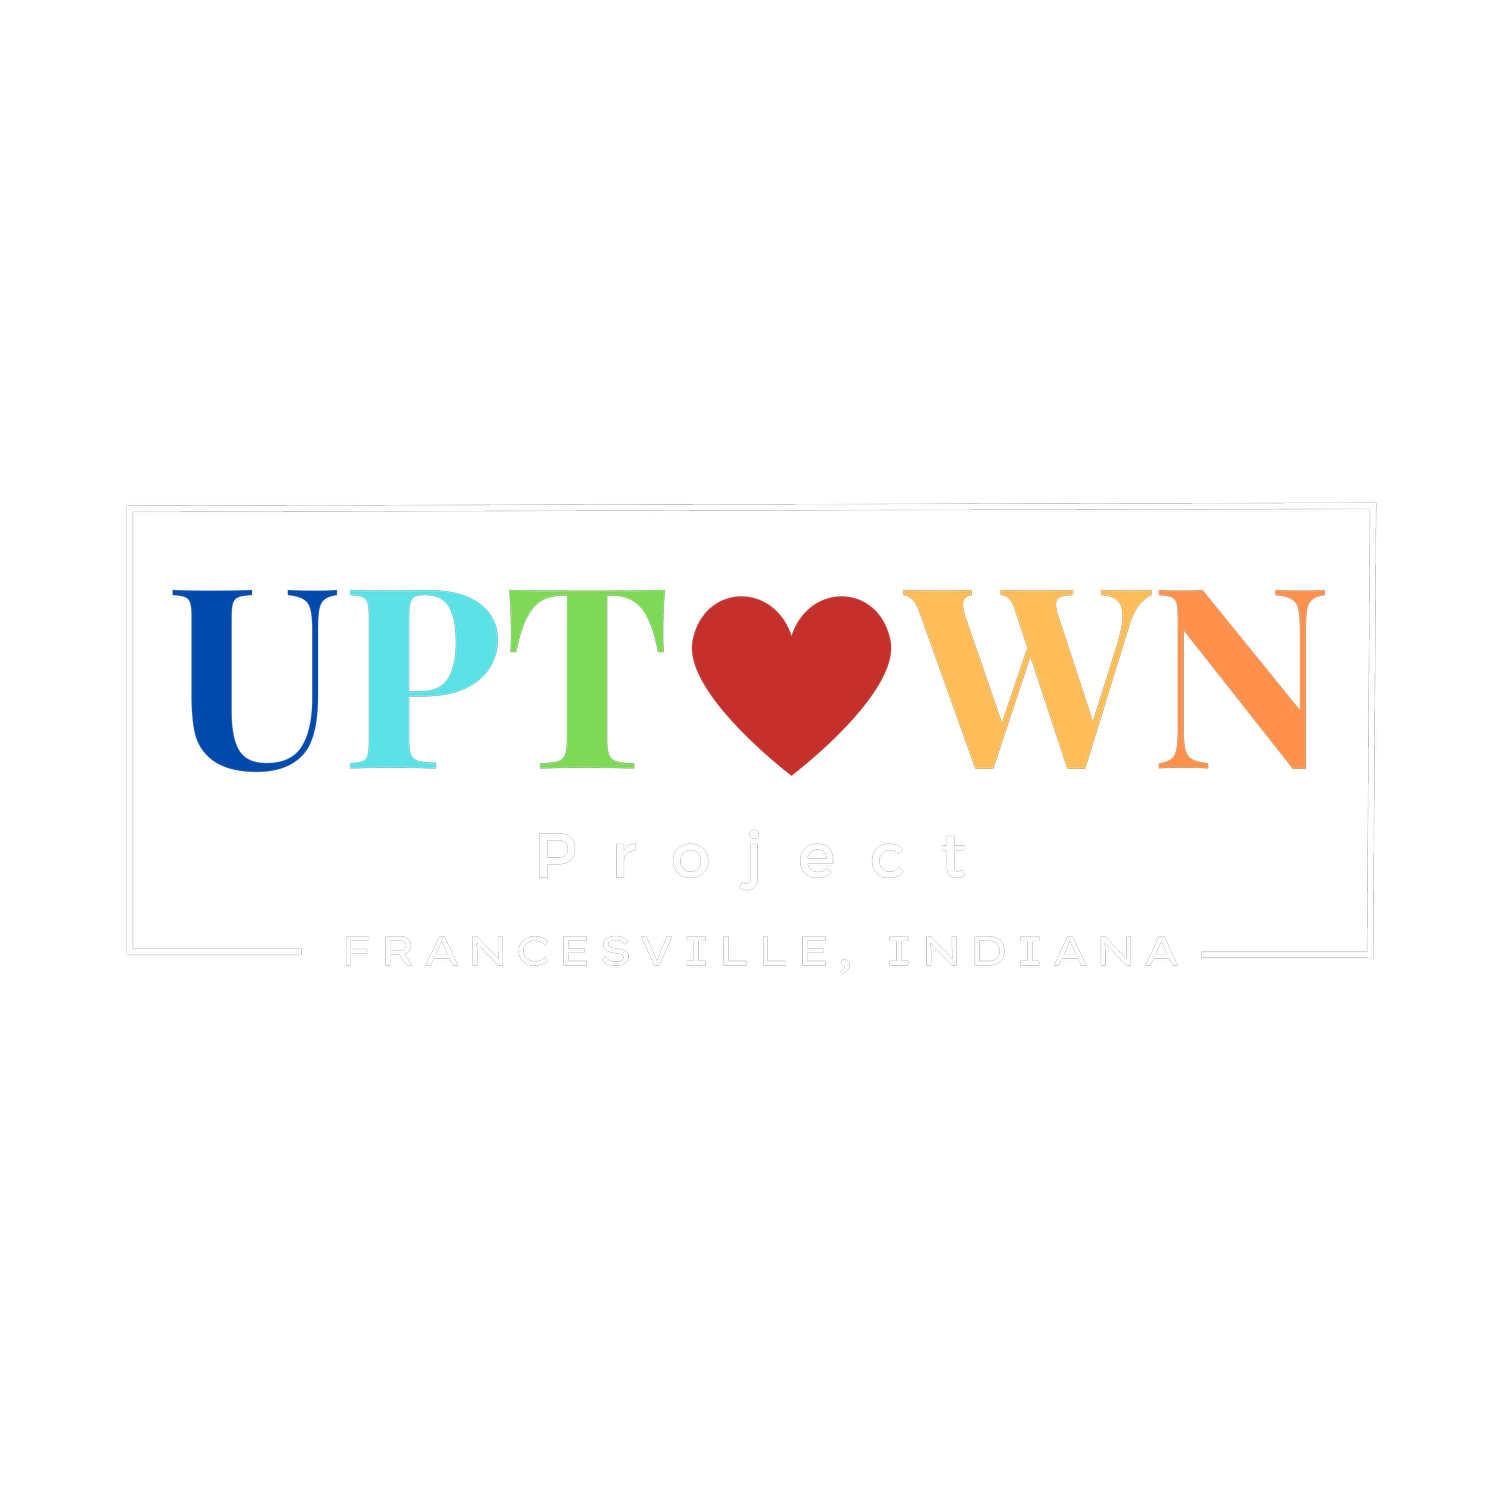 The Uptown Project